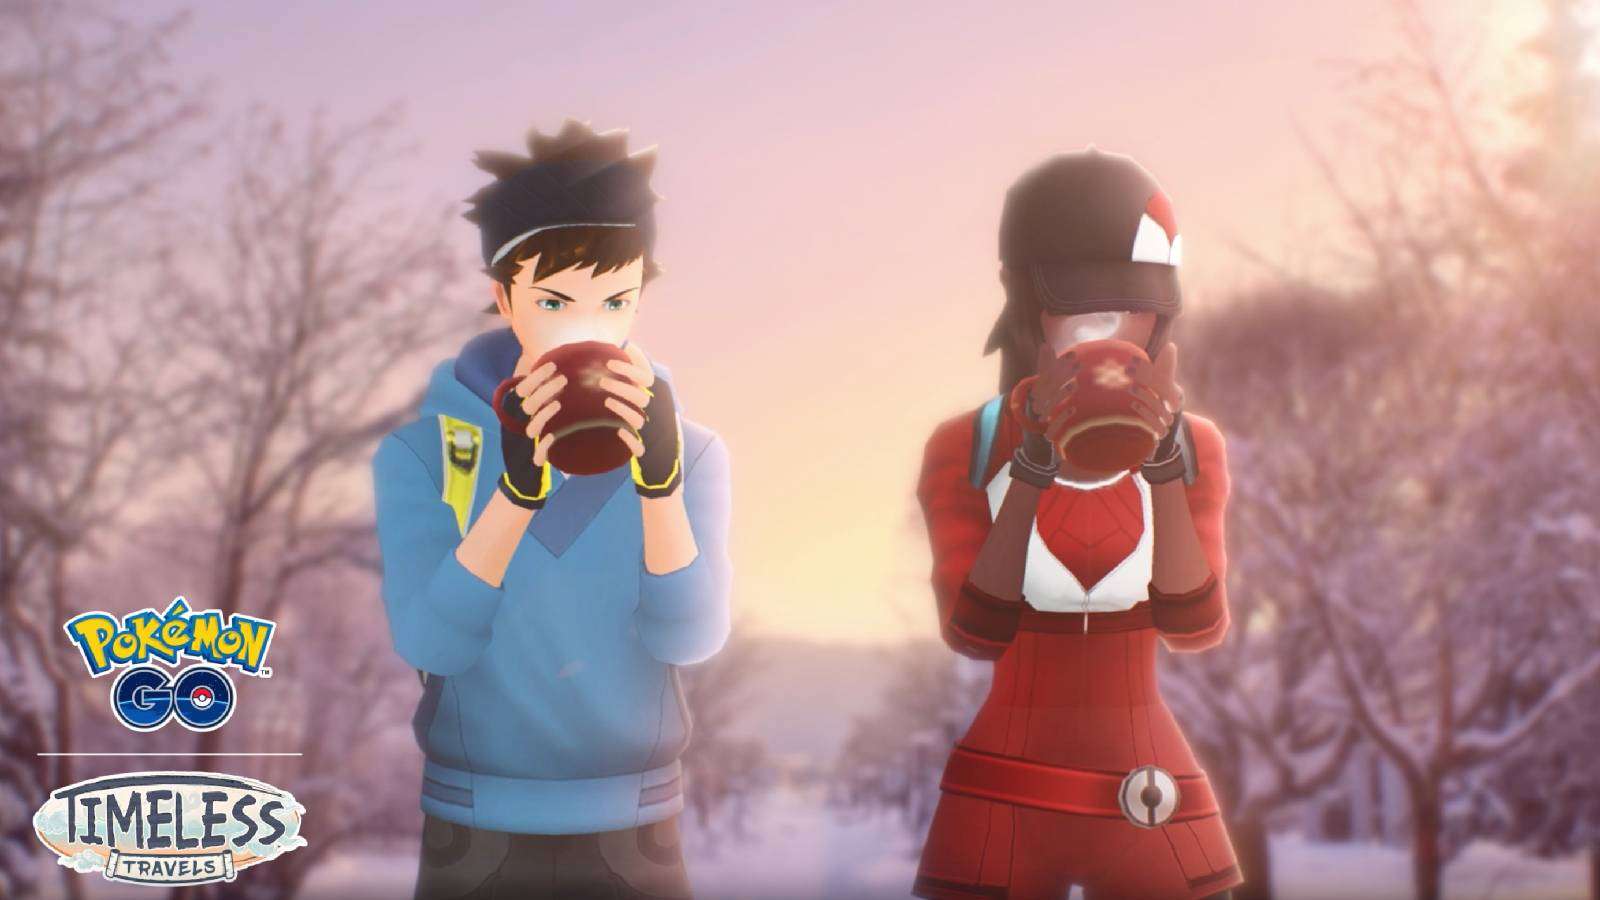 Ket art for the Pokemon Go Timeless Travels event shows two trainers dressed in winter clothes, lifting cups to their face with steaming liquid rising out of the mugs